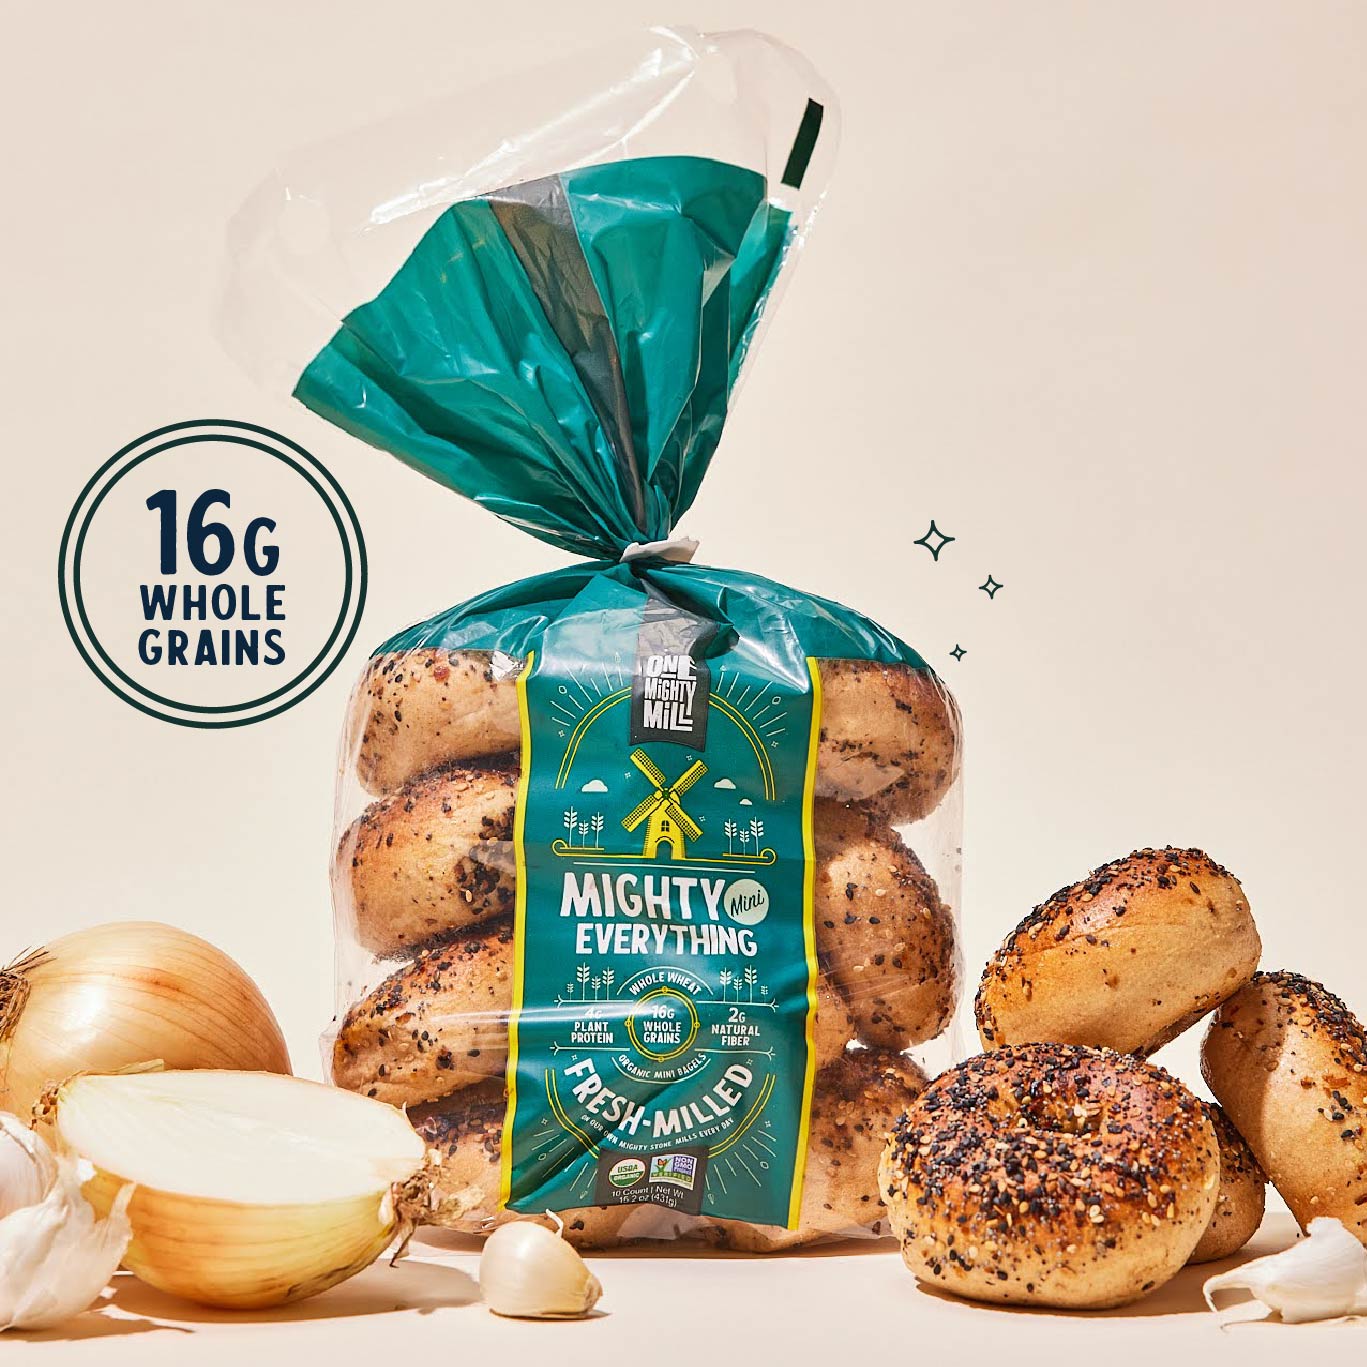 Everything MIghty Mini Bagels, 10 count, One Mighty Mill